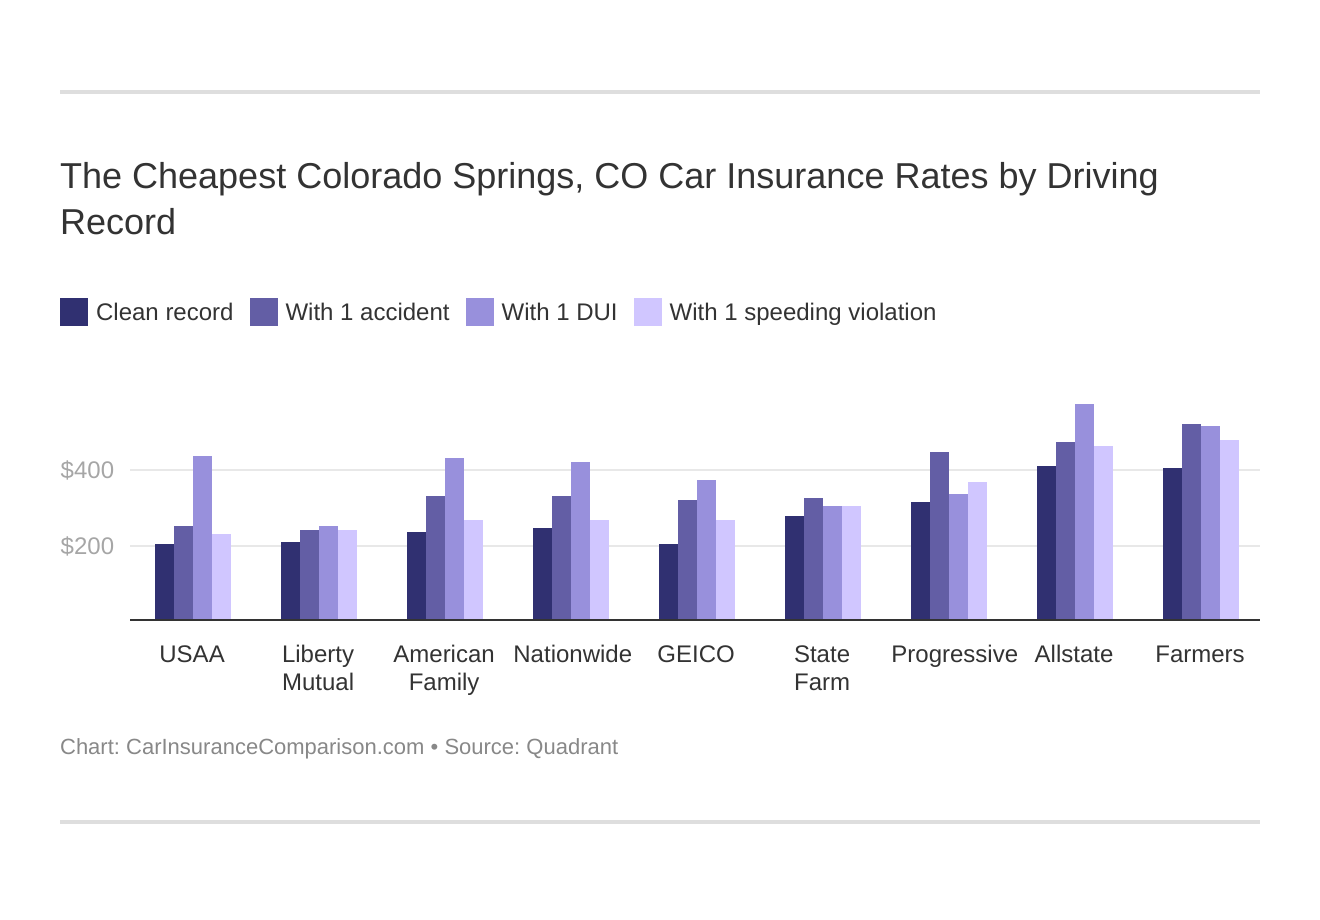 The Cheapest Colorado Springs, CO Car Insurance Rates by Driving Record